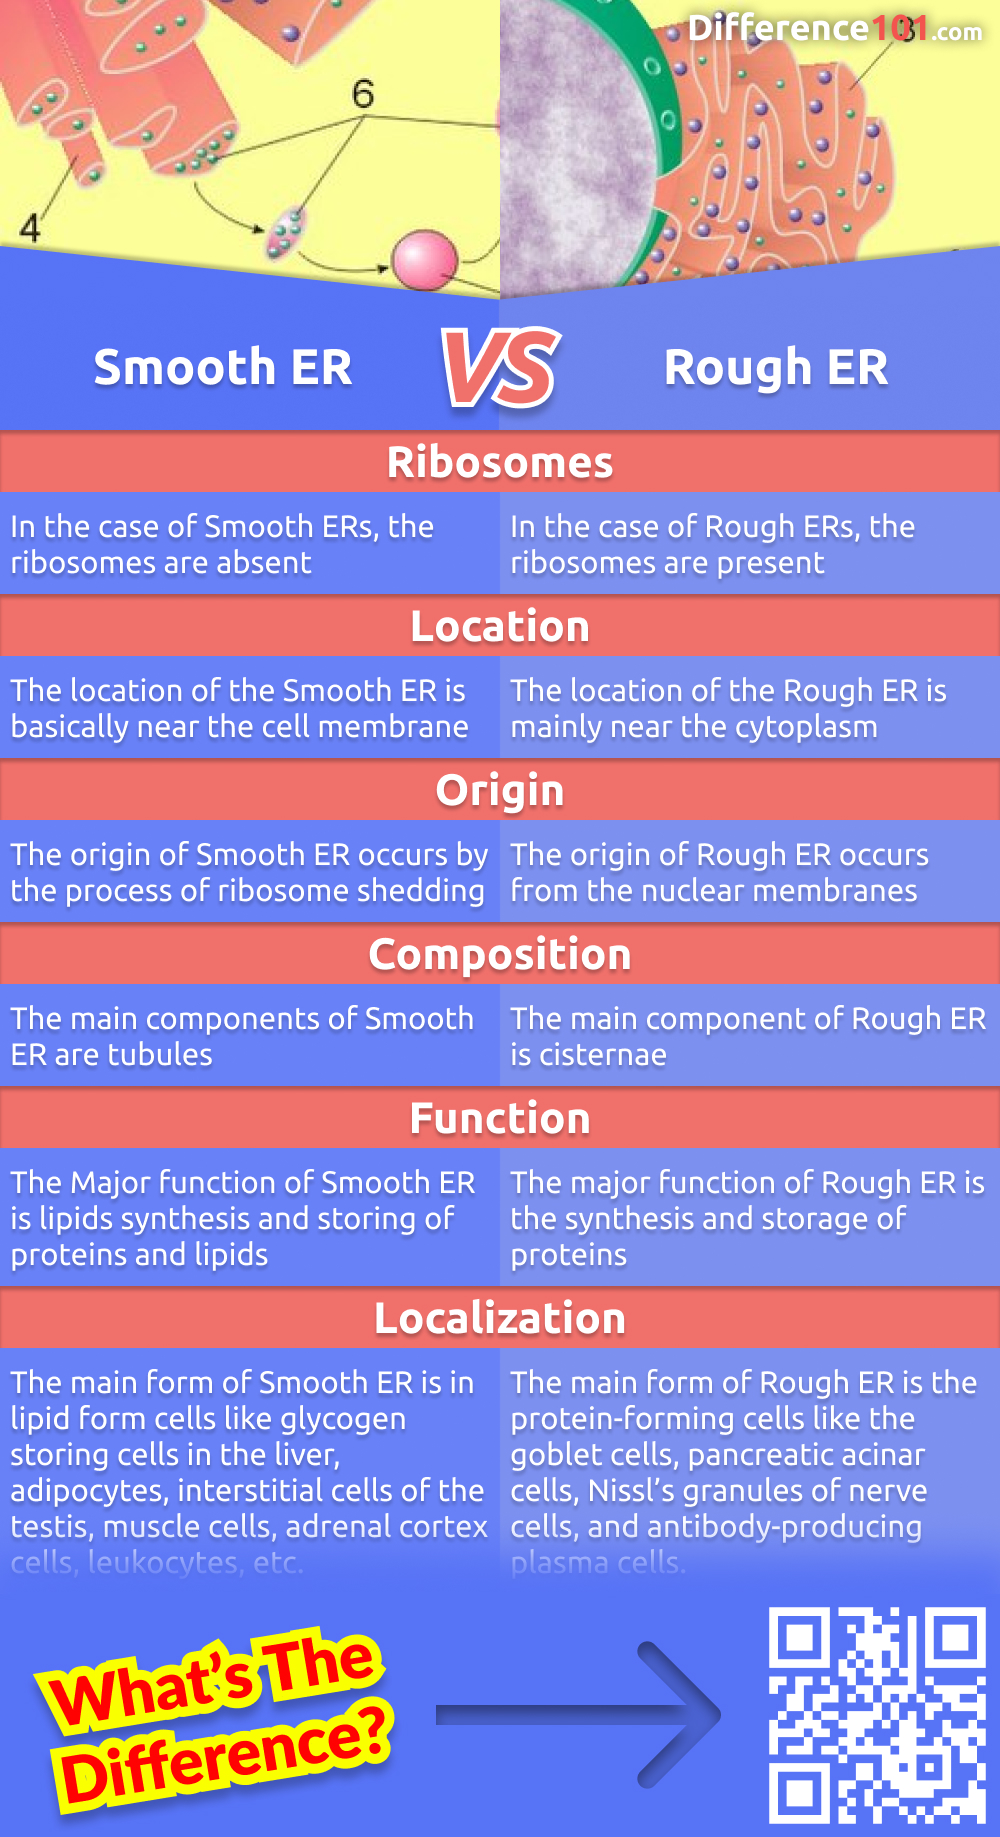 Do you know the difference between the smooth and rough endoplasmic reticulum? Check out this article to learn about the structure, functions of each type of ER and their key differences.